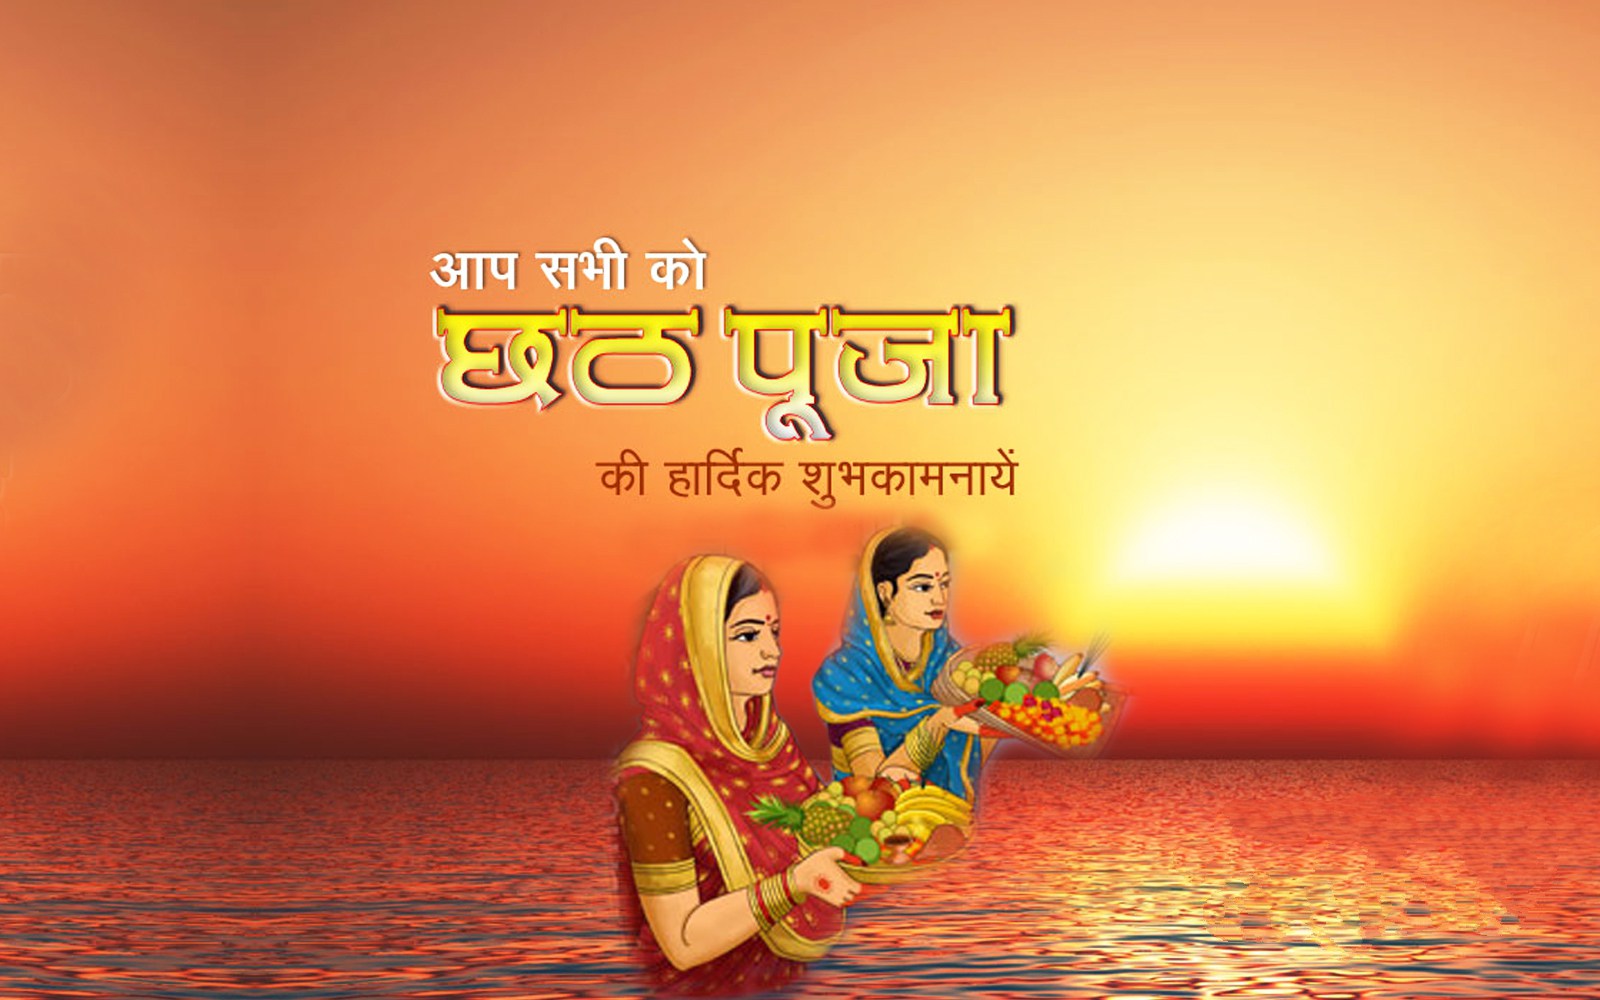 Happy Chhath Puja 2018 , HD Wallpaper & Backgrounds